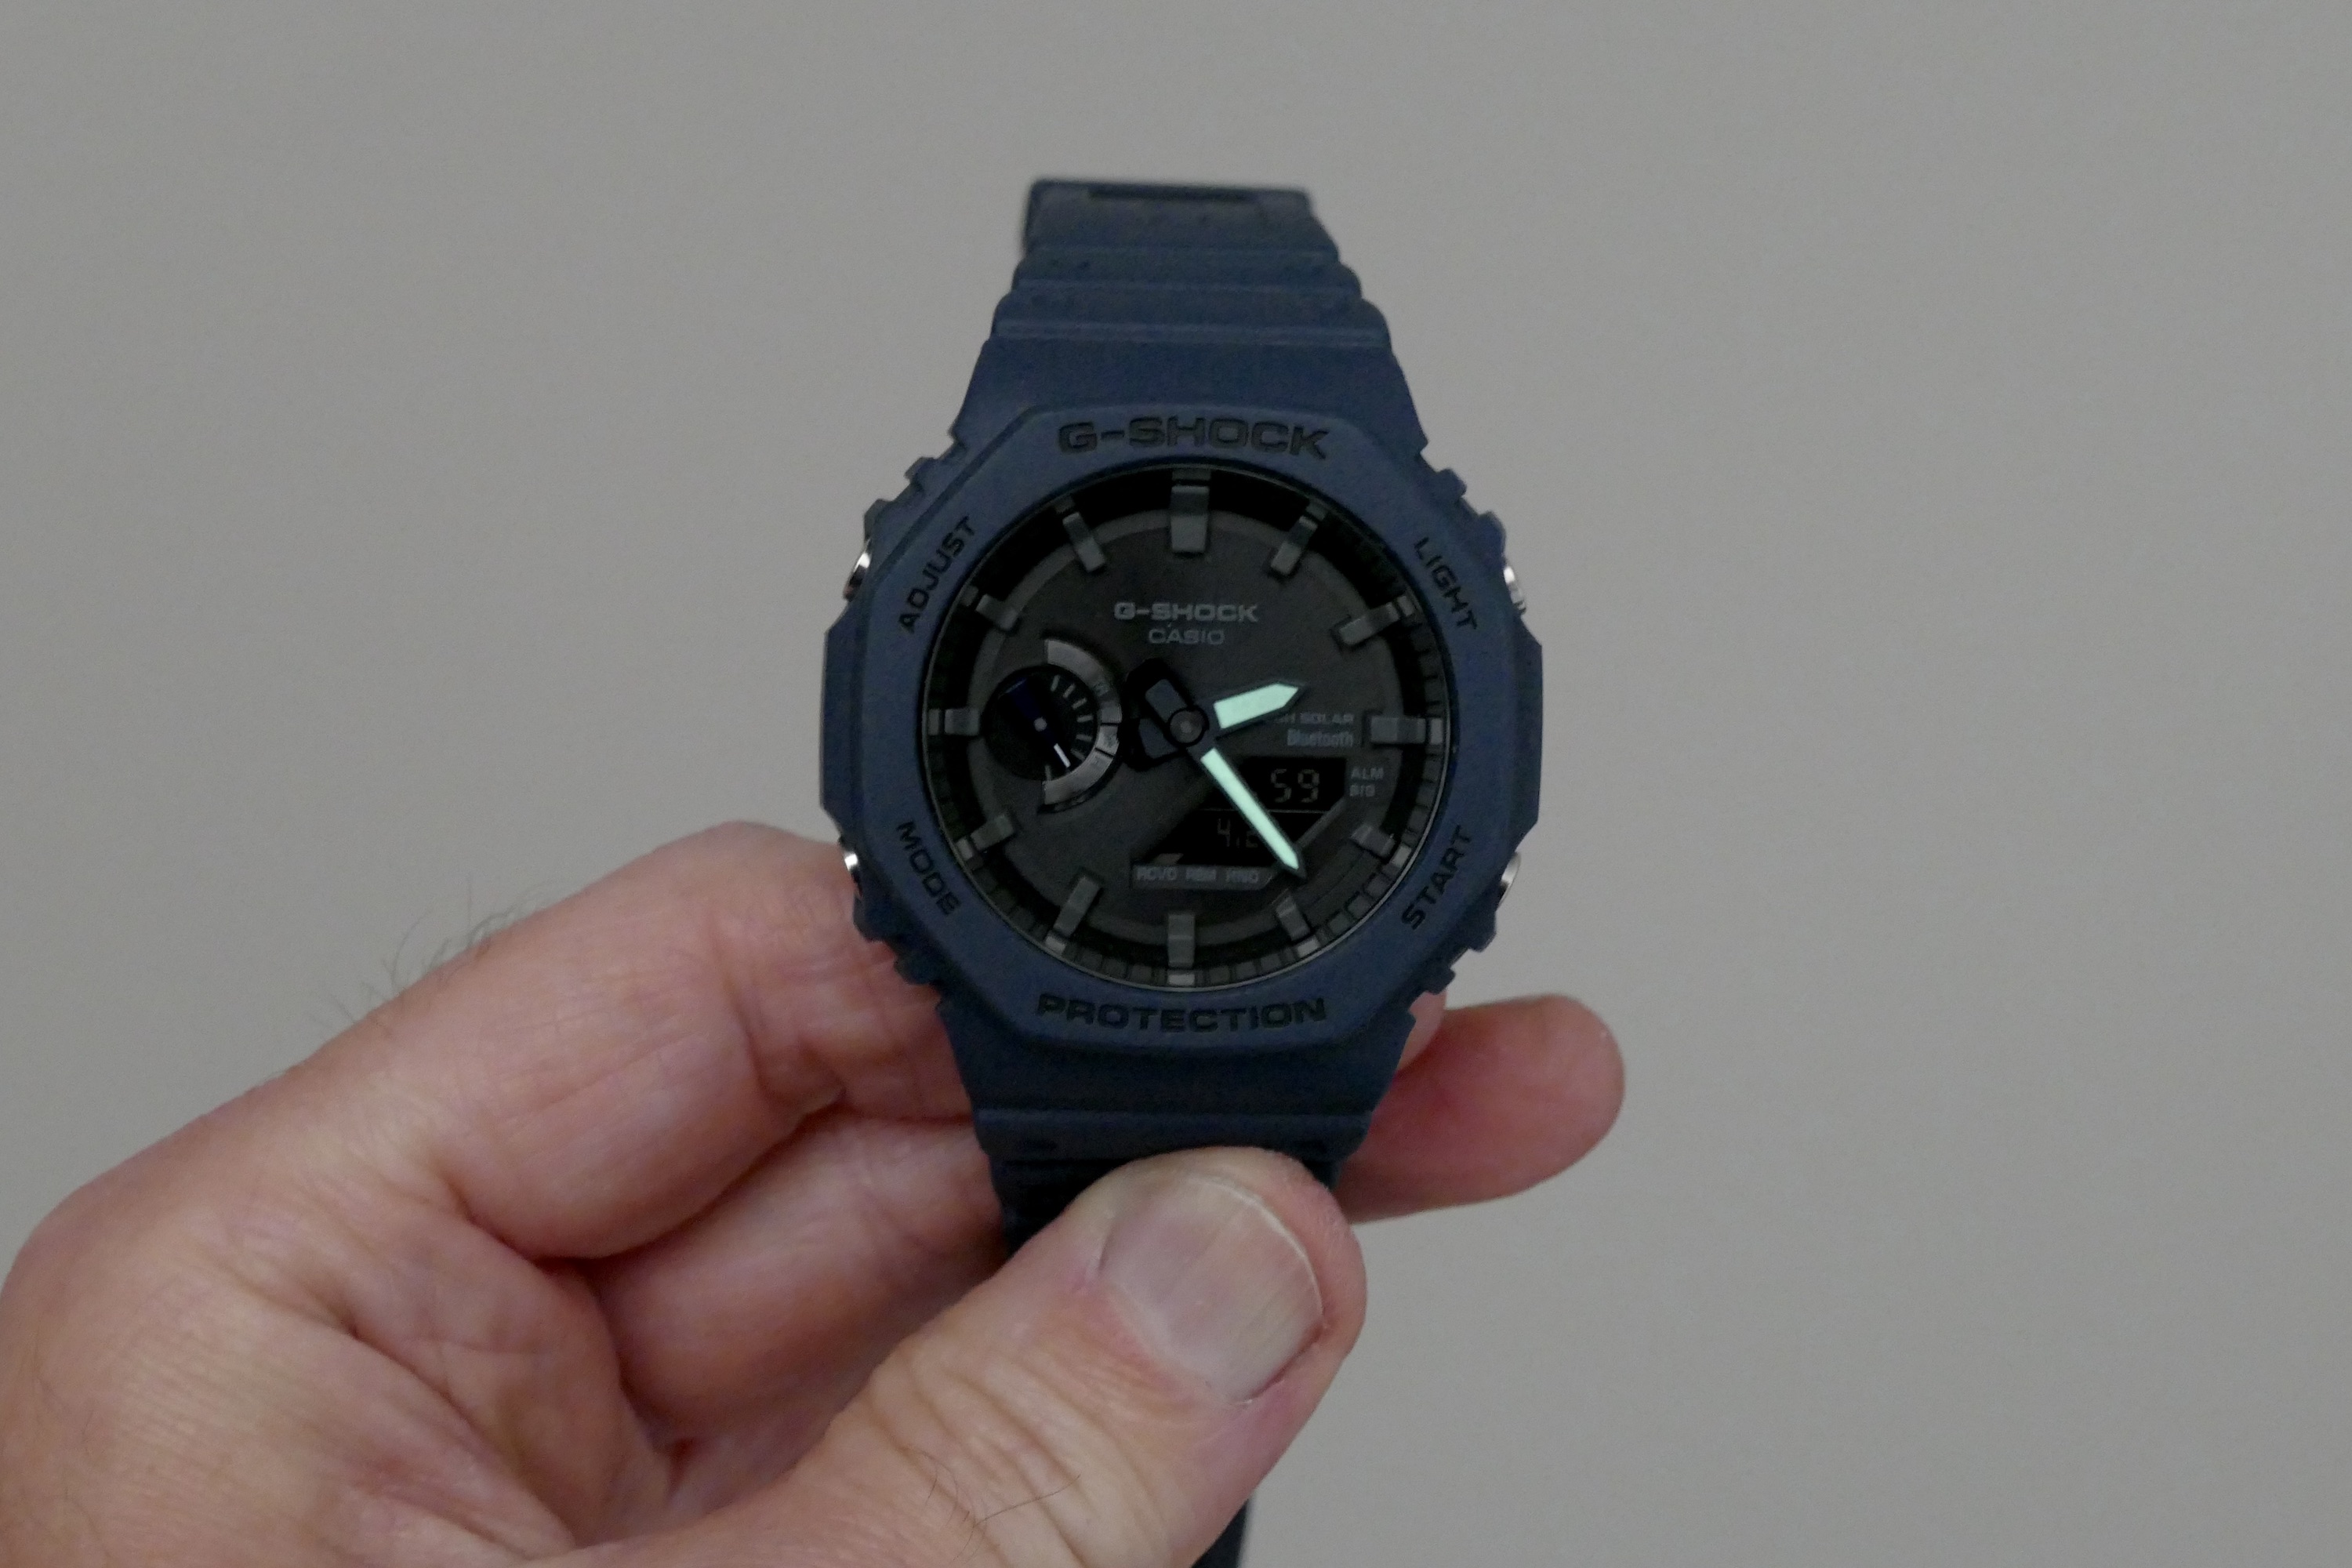 The tech-boosted G-Shock GA-B2100 watch Digital buy a is Trends great 